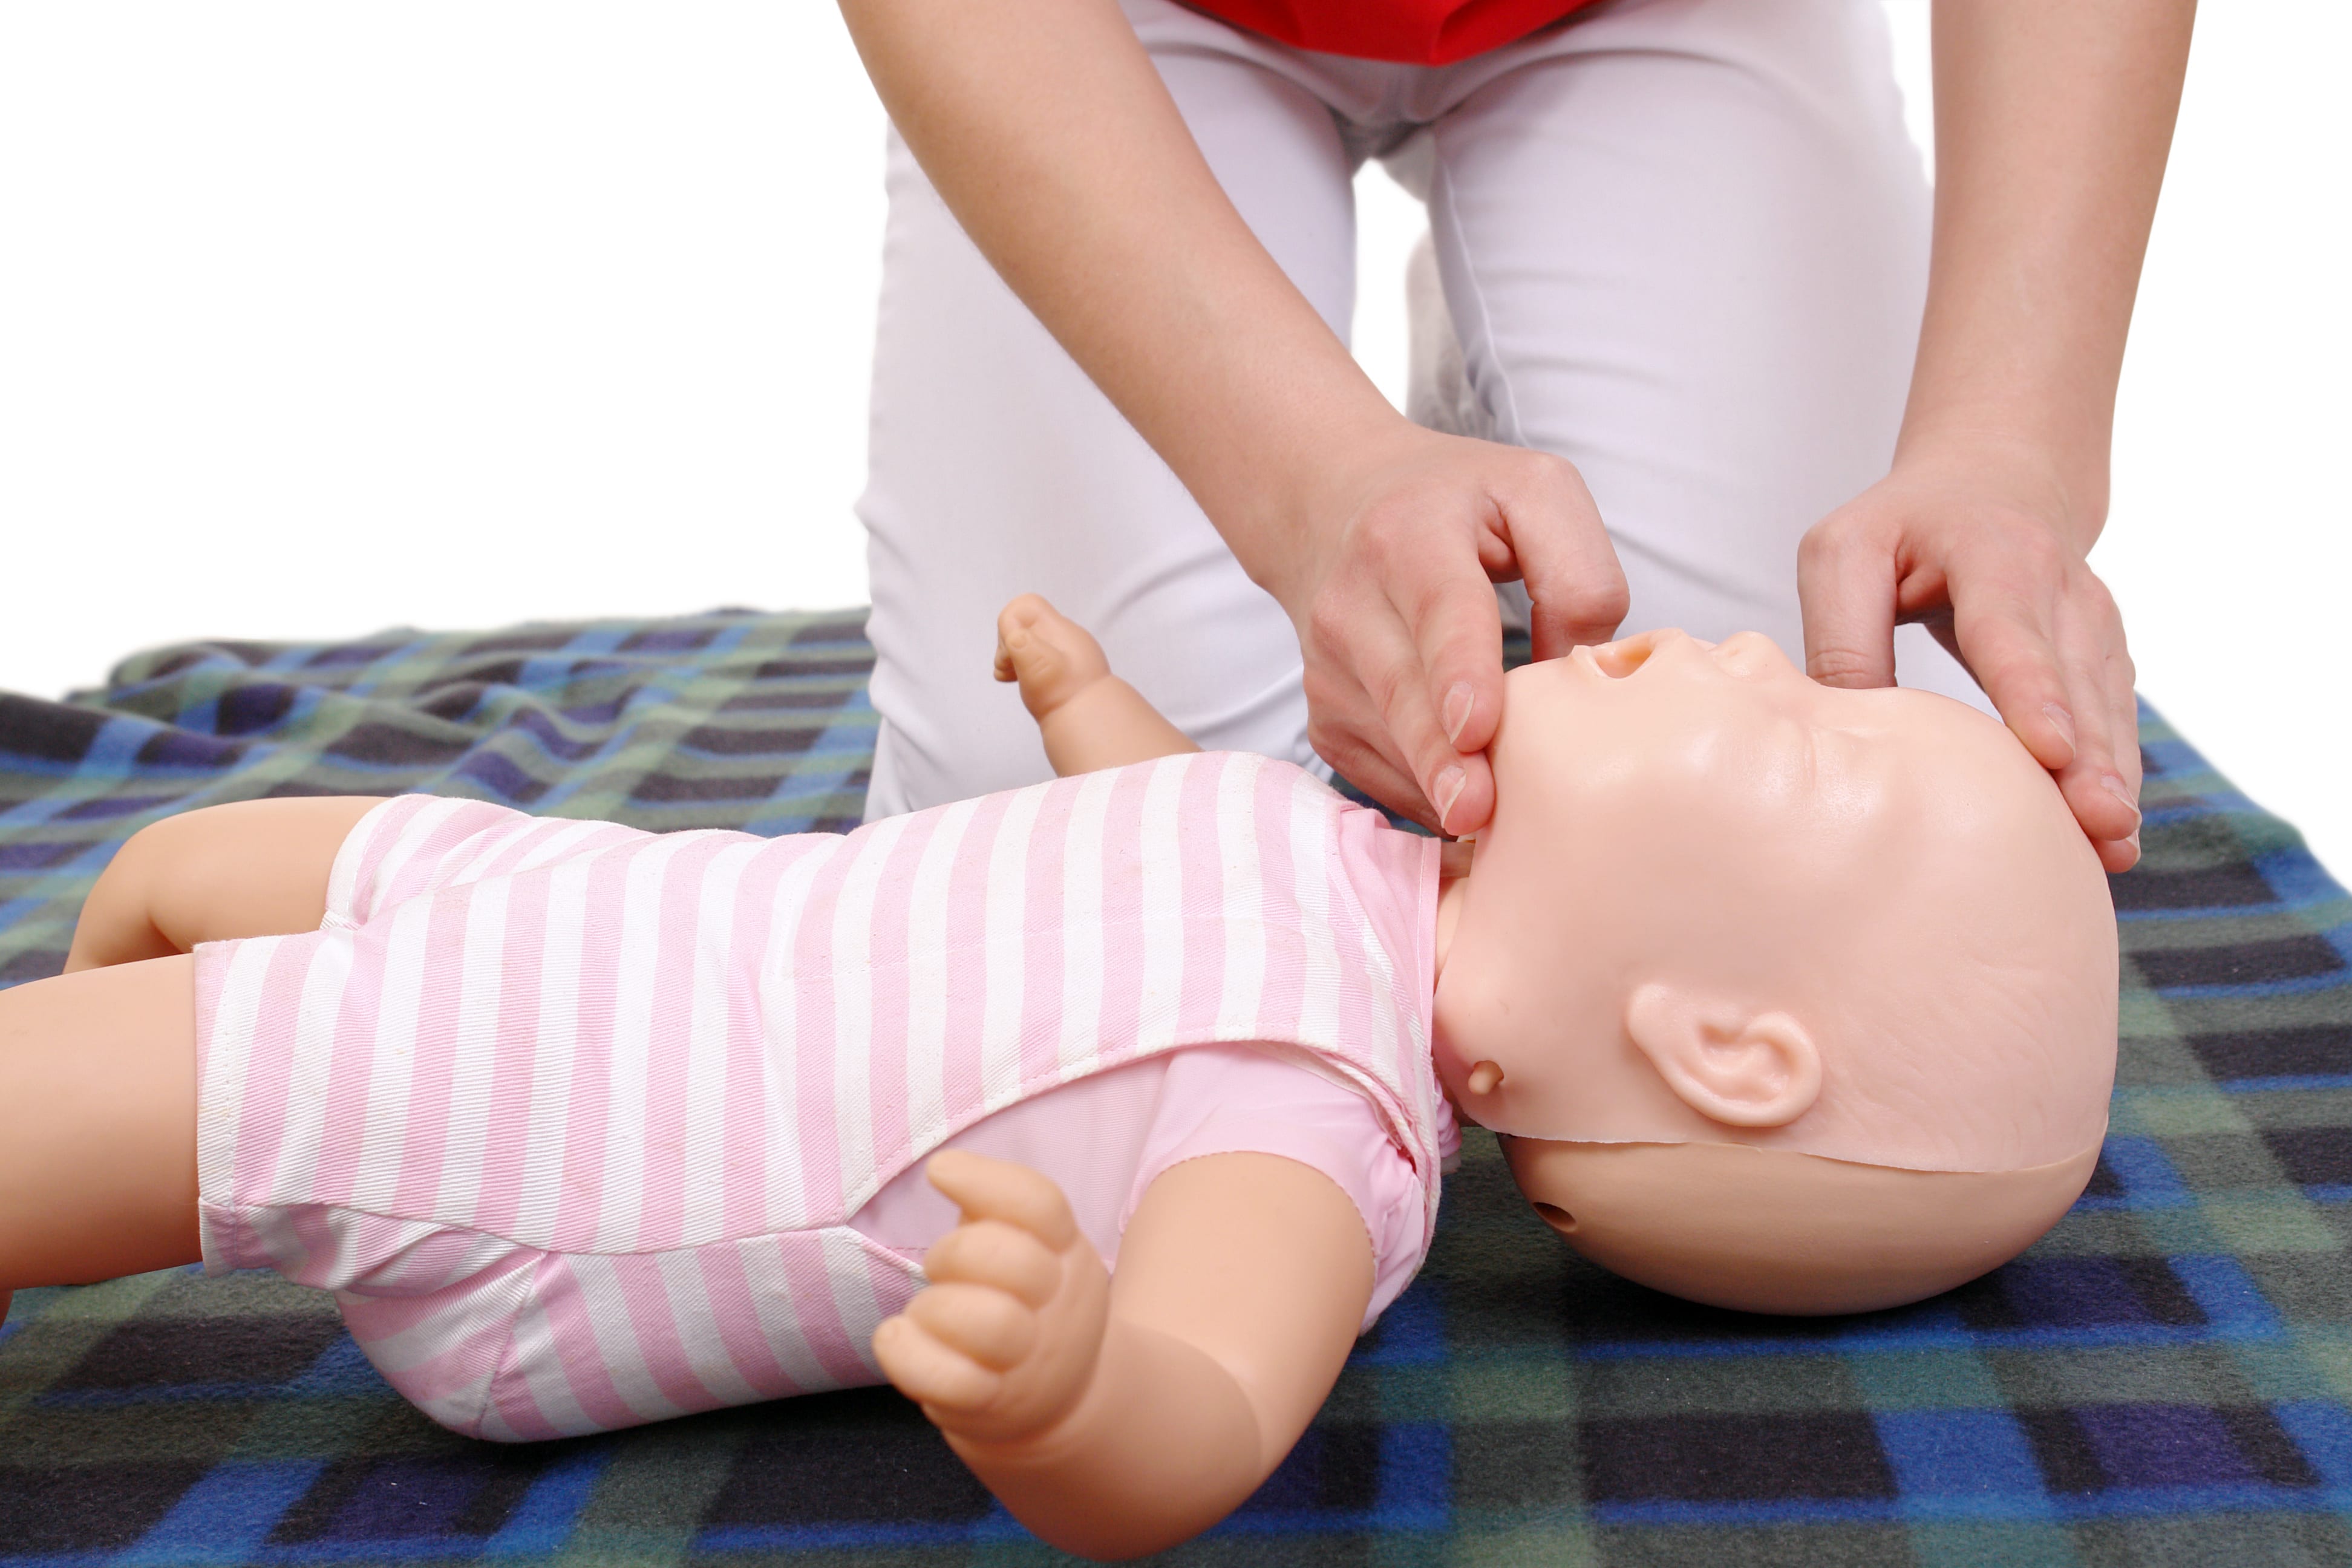 Infant dummy first aid demonstration series - First aid instructor showing how to position infant head before proceeding to mouth-to-mouth resuscitation